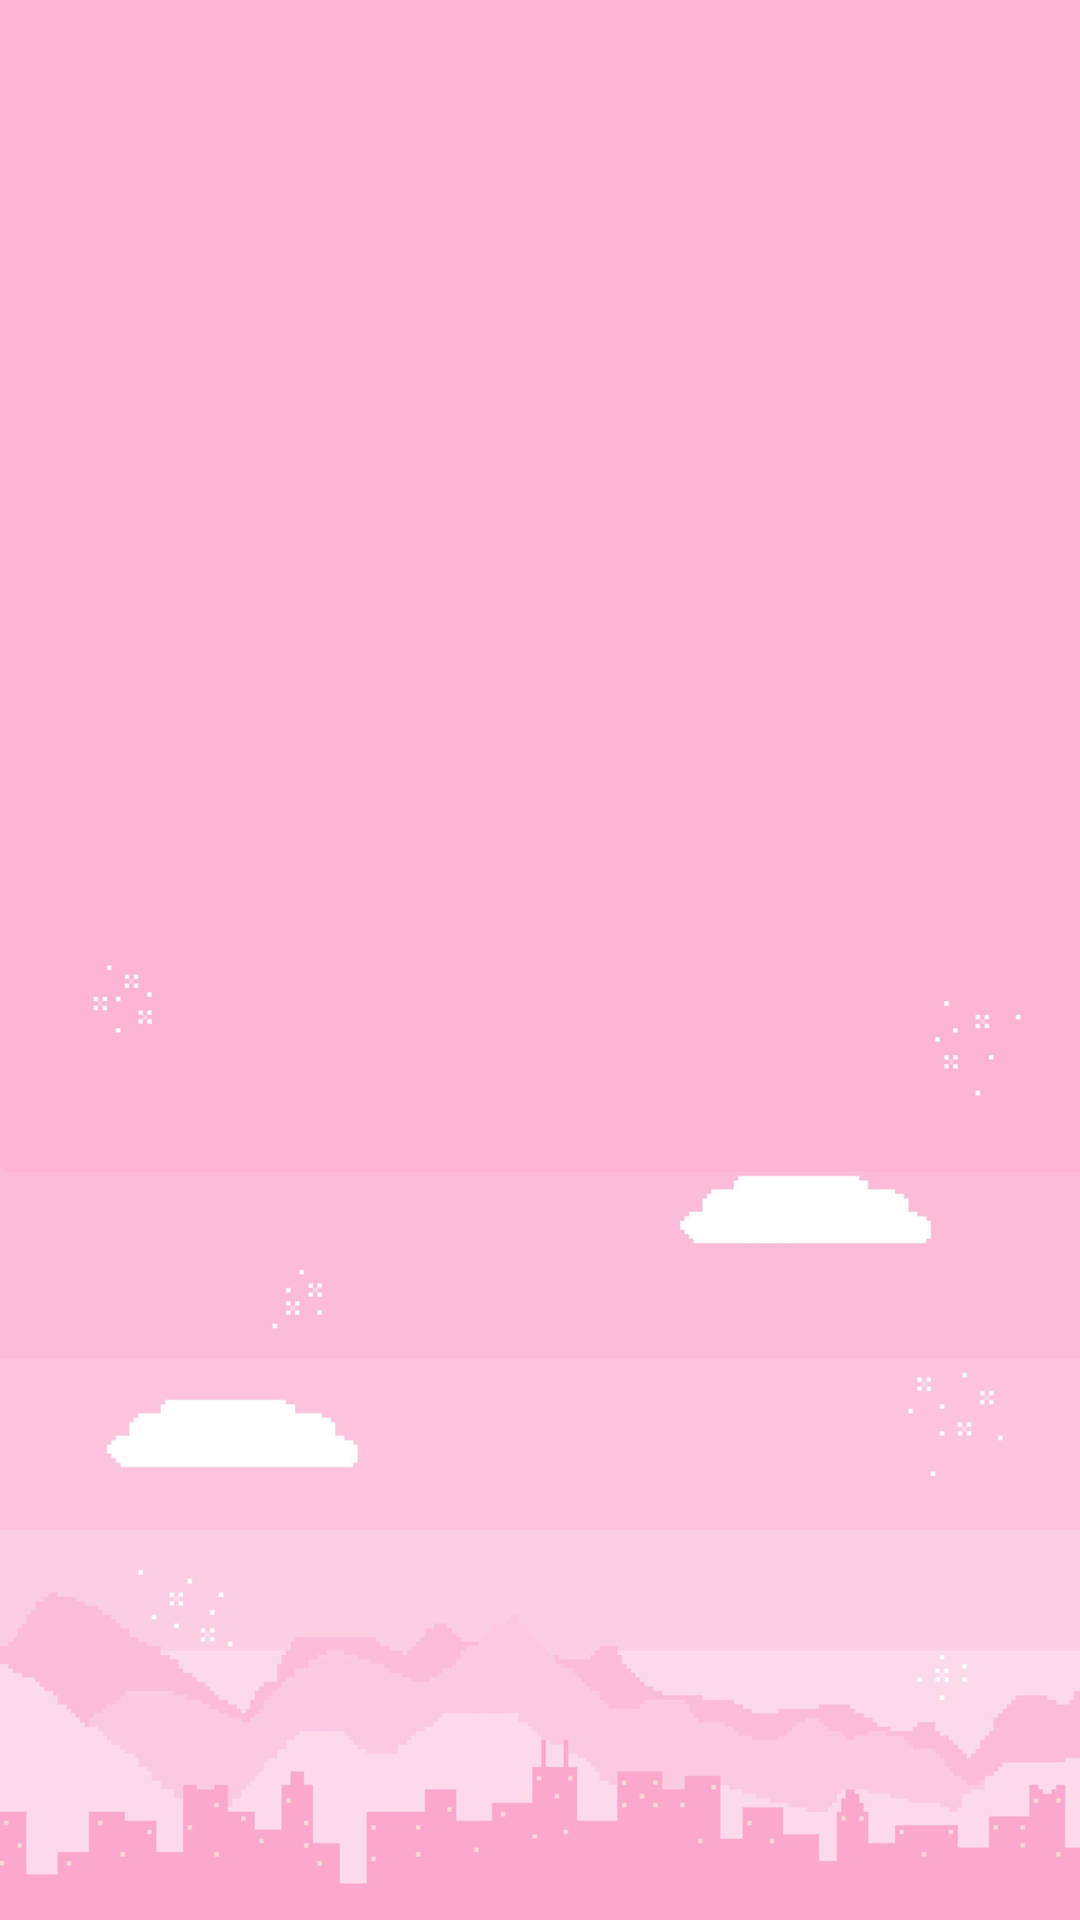 Pixel City In Pink Aesthetic Background